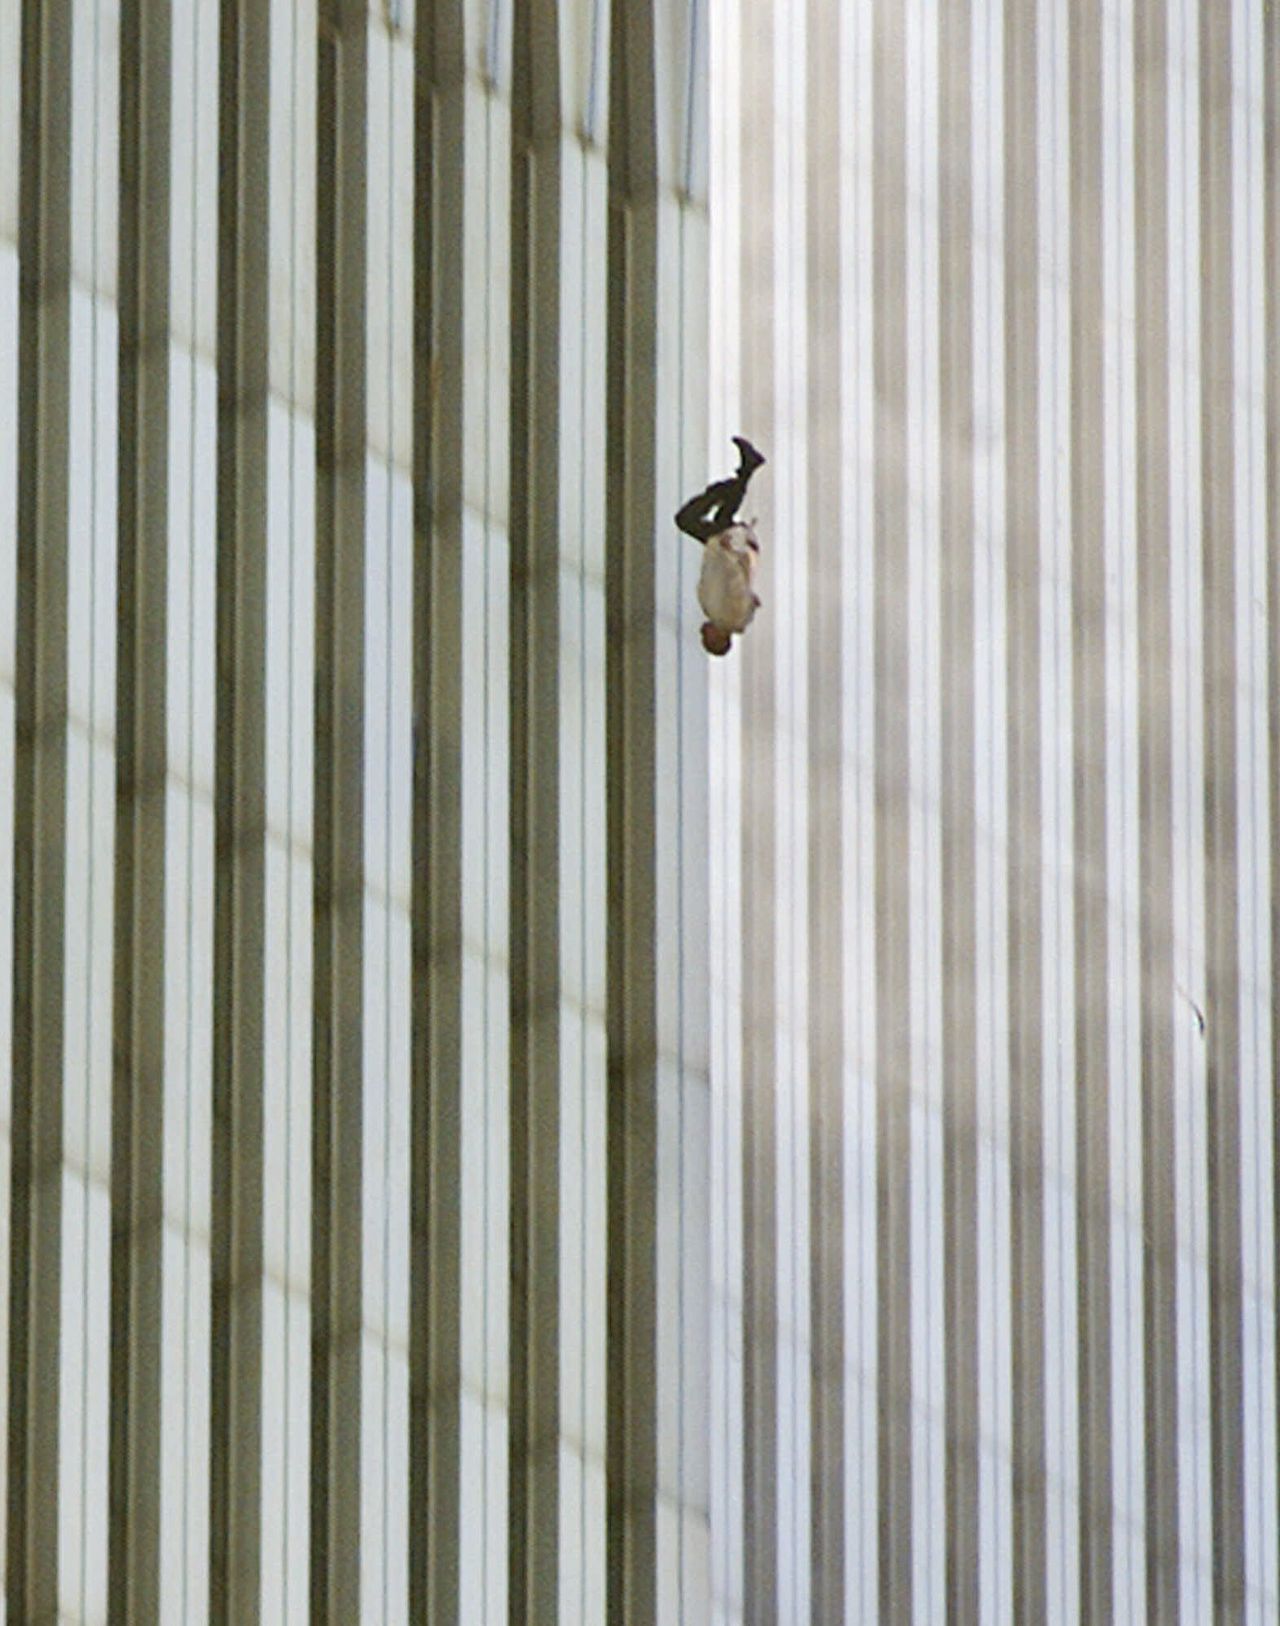 FILE - In this Tuesday, Sept. 11, 2001 file picture, a person falls headfirst from the north tower of New York's World Trade Center. (AP Photo/Richard Drew)